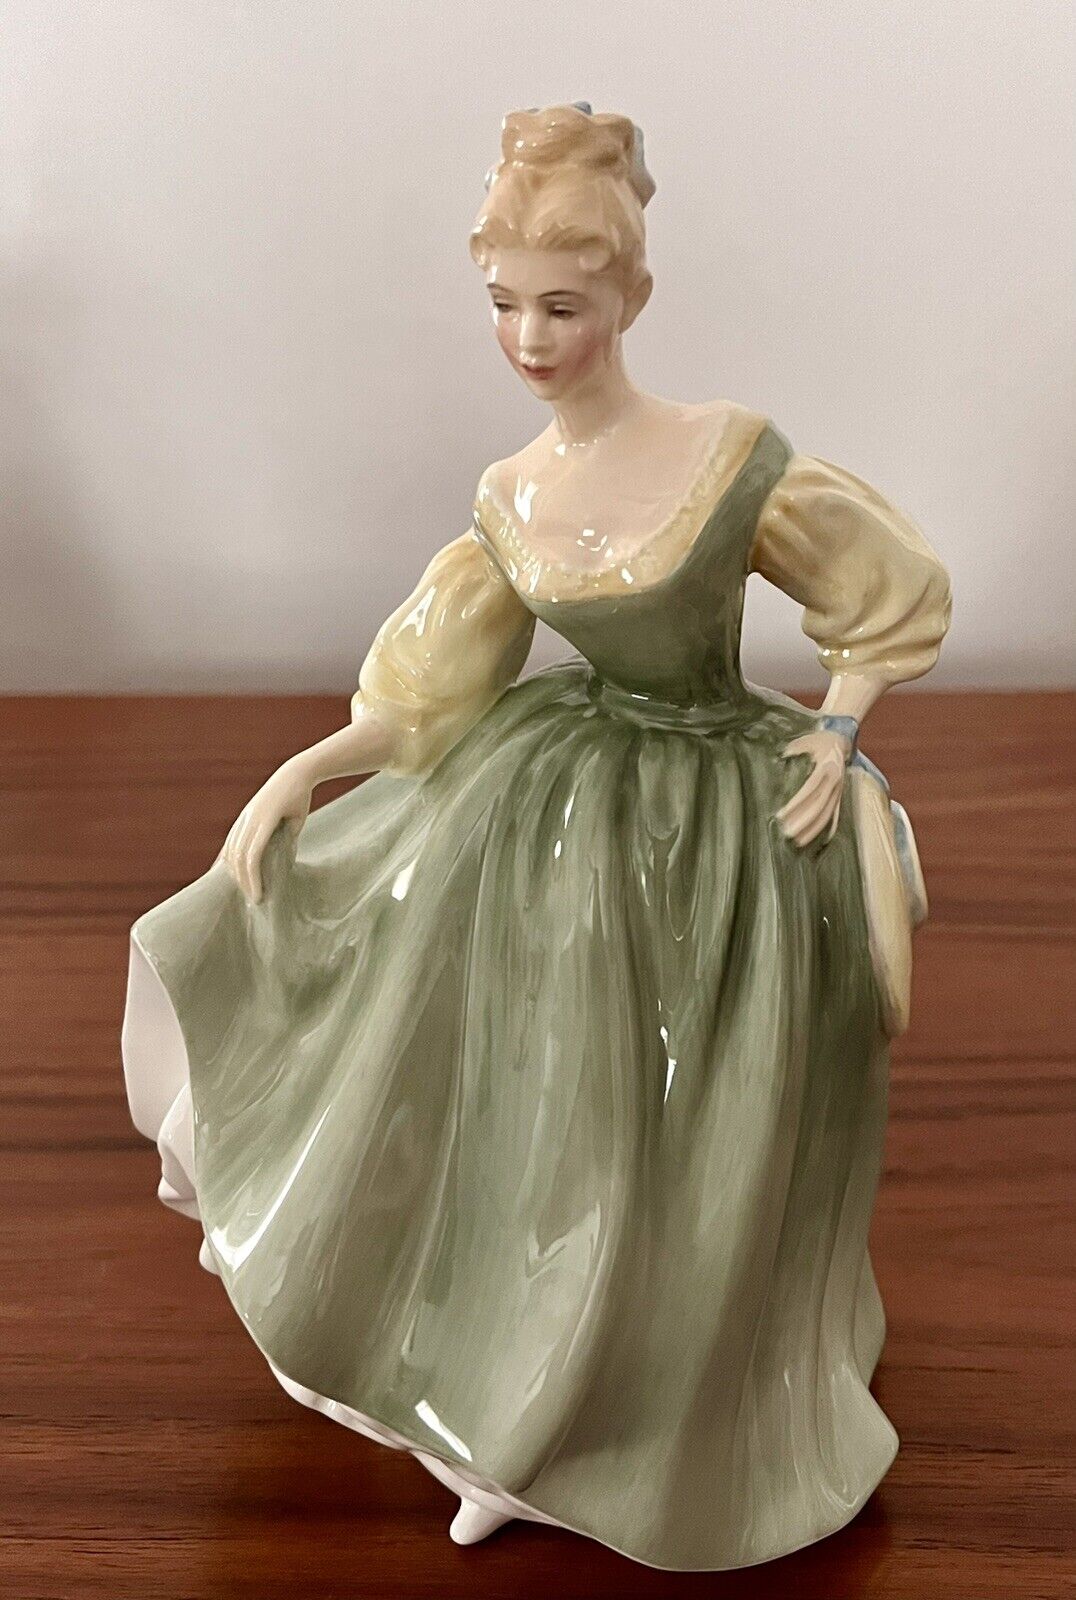 Vintage Royal Doulton FAIR LADY Figurine HN2193 from the 1960s